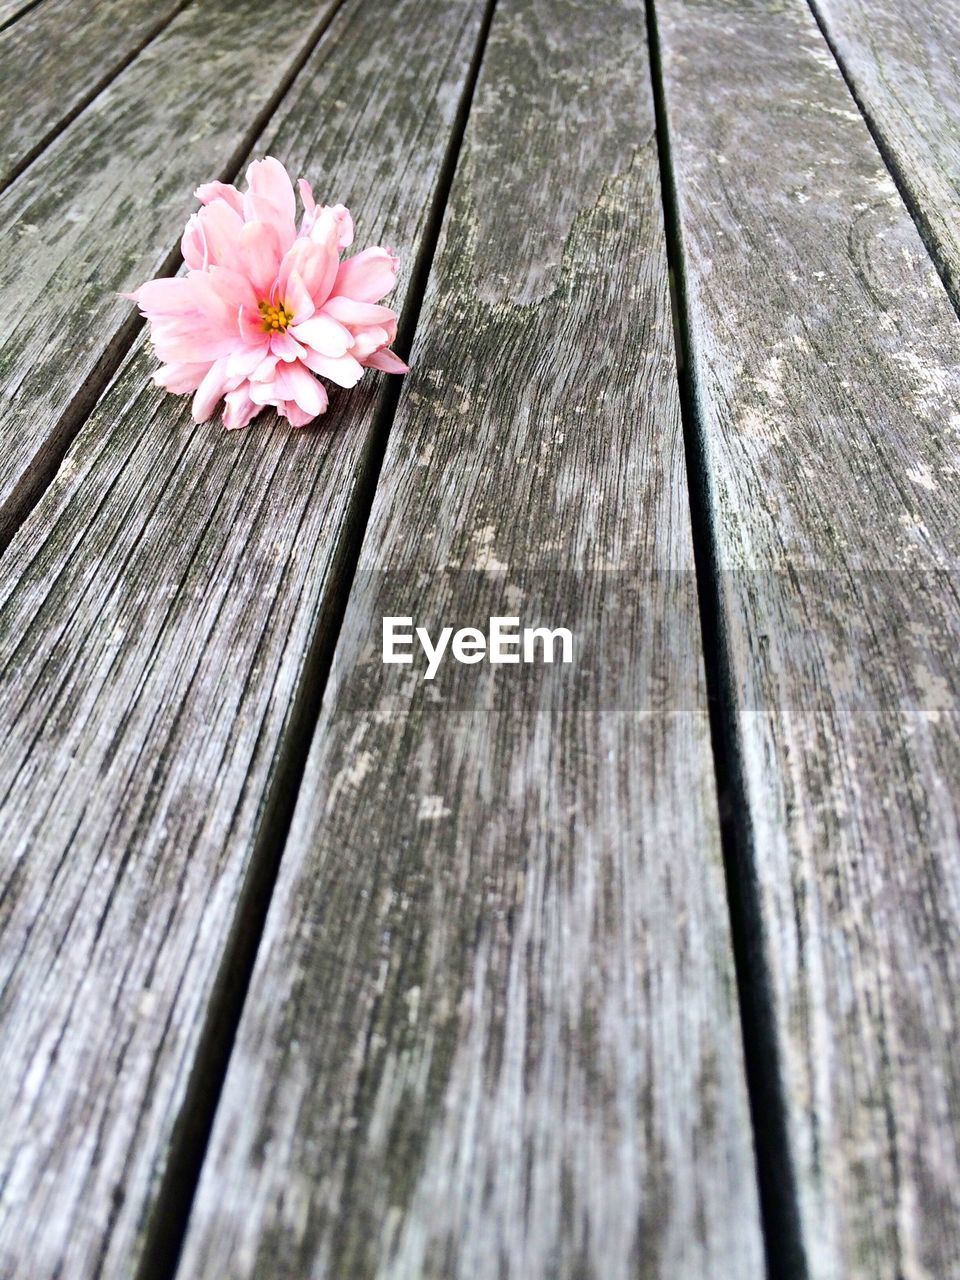 Flower on wooden table